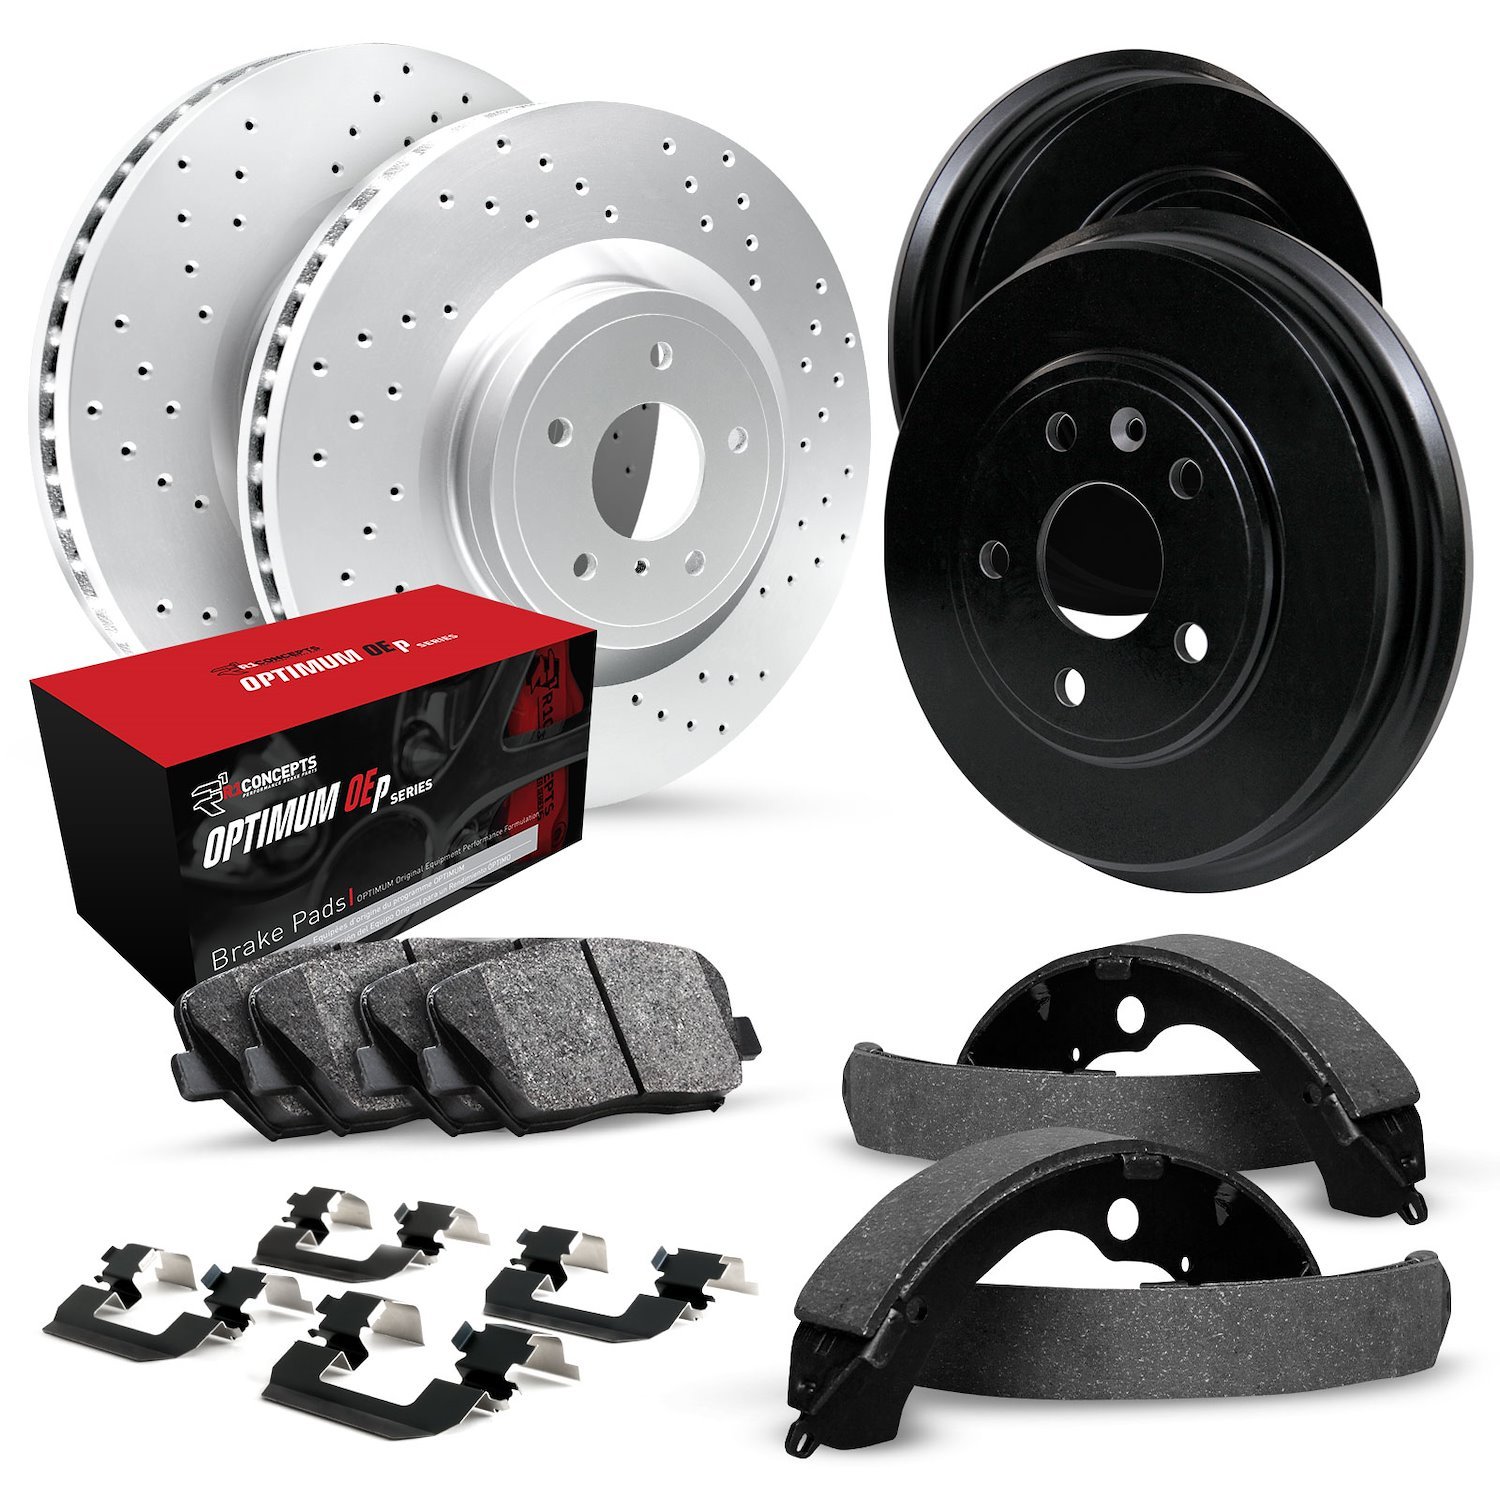 GEO-Carbon Drilled Brake Rotor & Drum Set w/Optimum OE Pads, Shoes, & Hardware, 1979-1980 GM, Position: Front & Rear